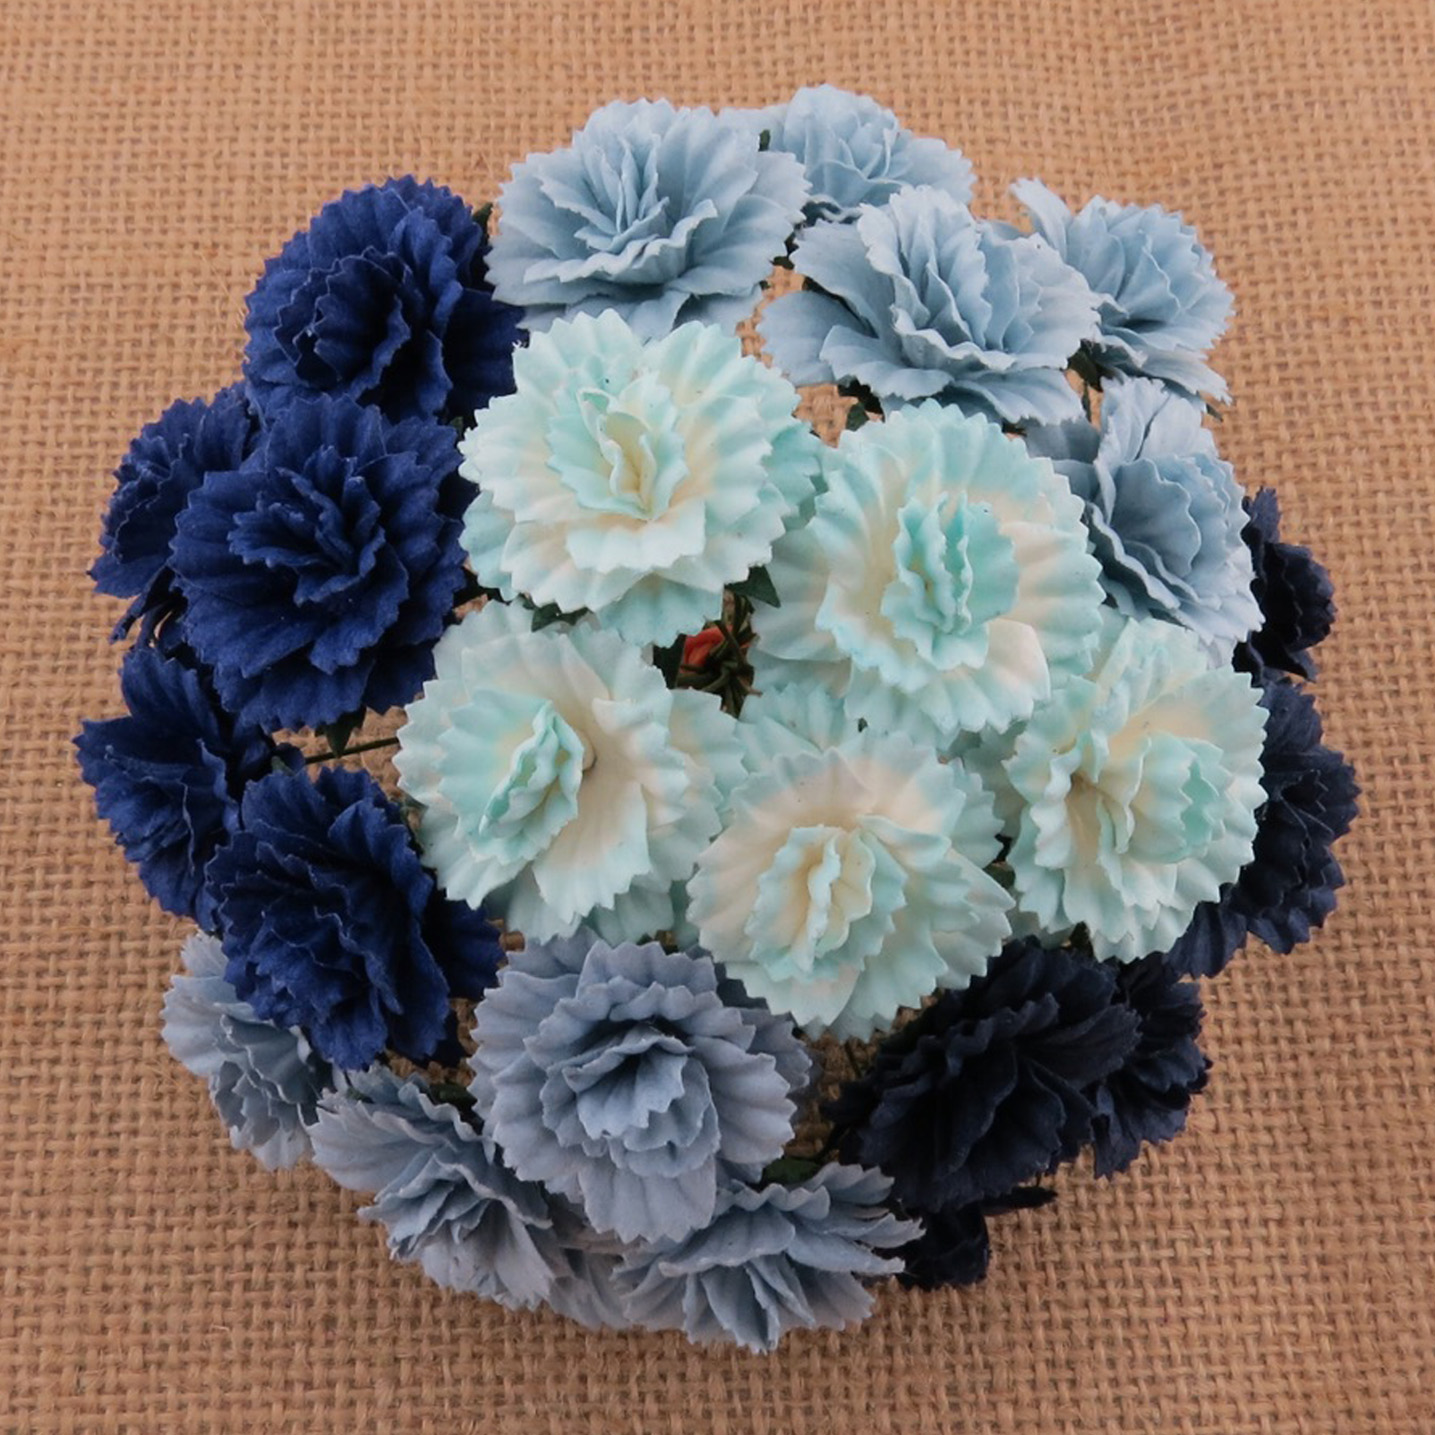 50 MIXED BLUE MULBERRY PAPER CARNATION FLOWERS